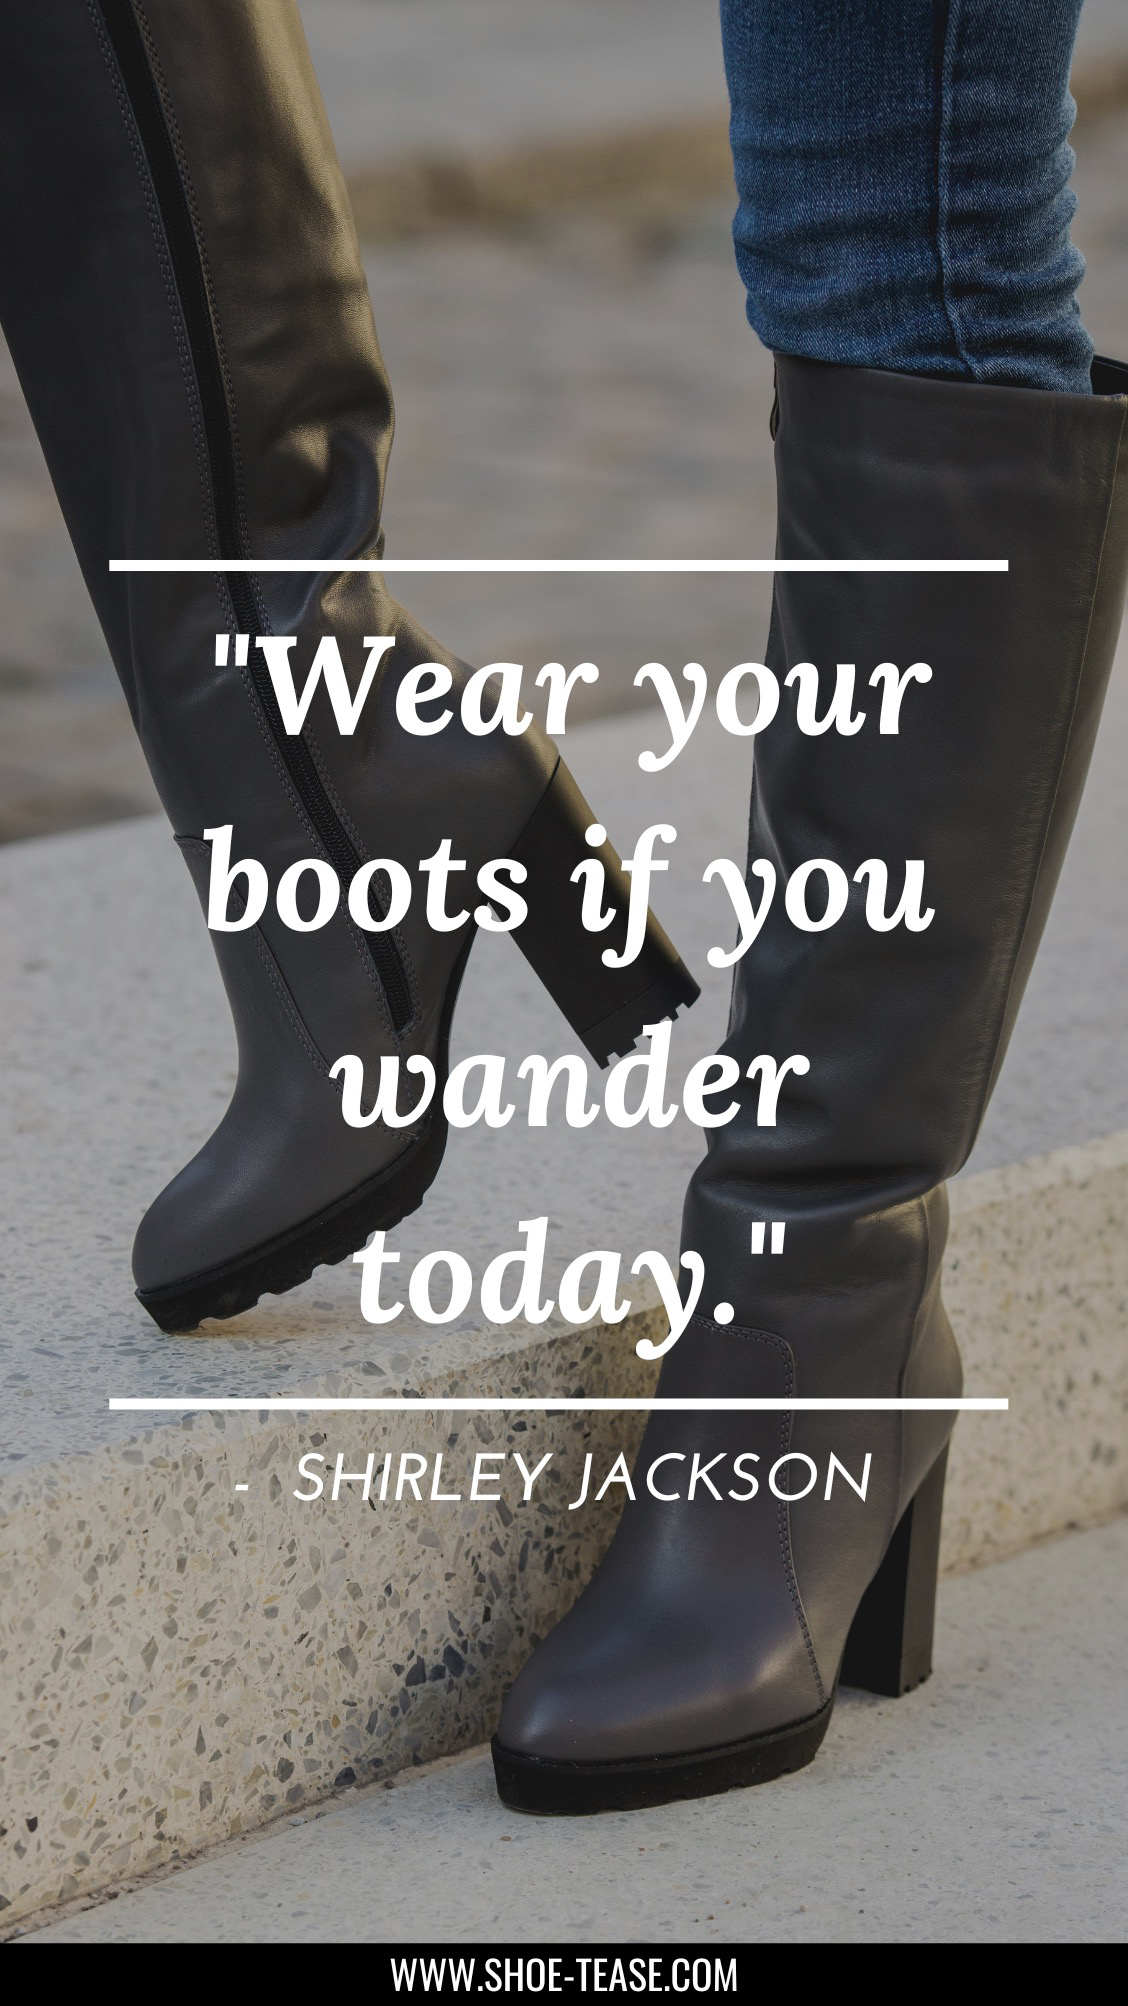 Text reading Wear your boots if you wander today by Shirley Jackson over cropped view of woman's legs wearing skinny jeans and high heeled grey knee boots.